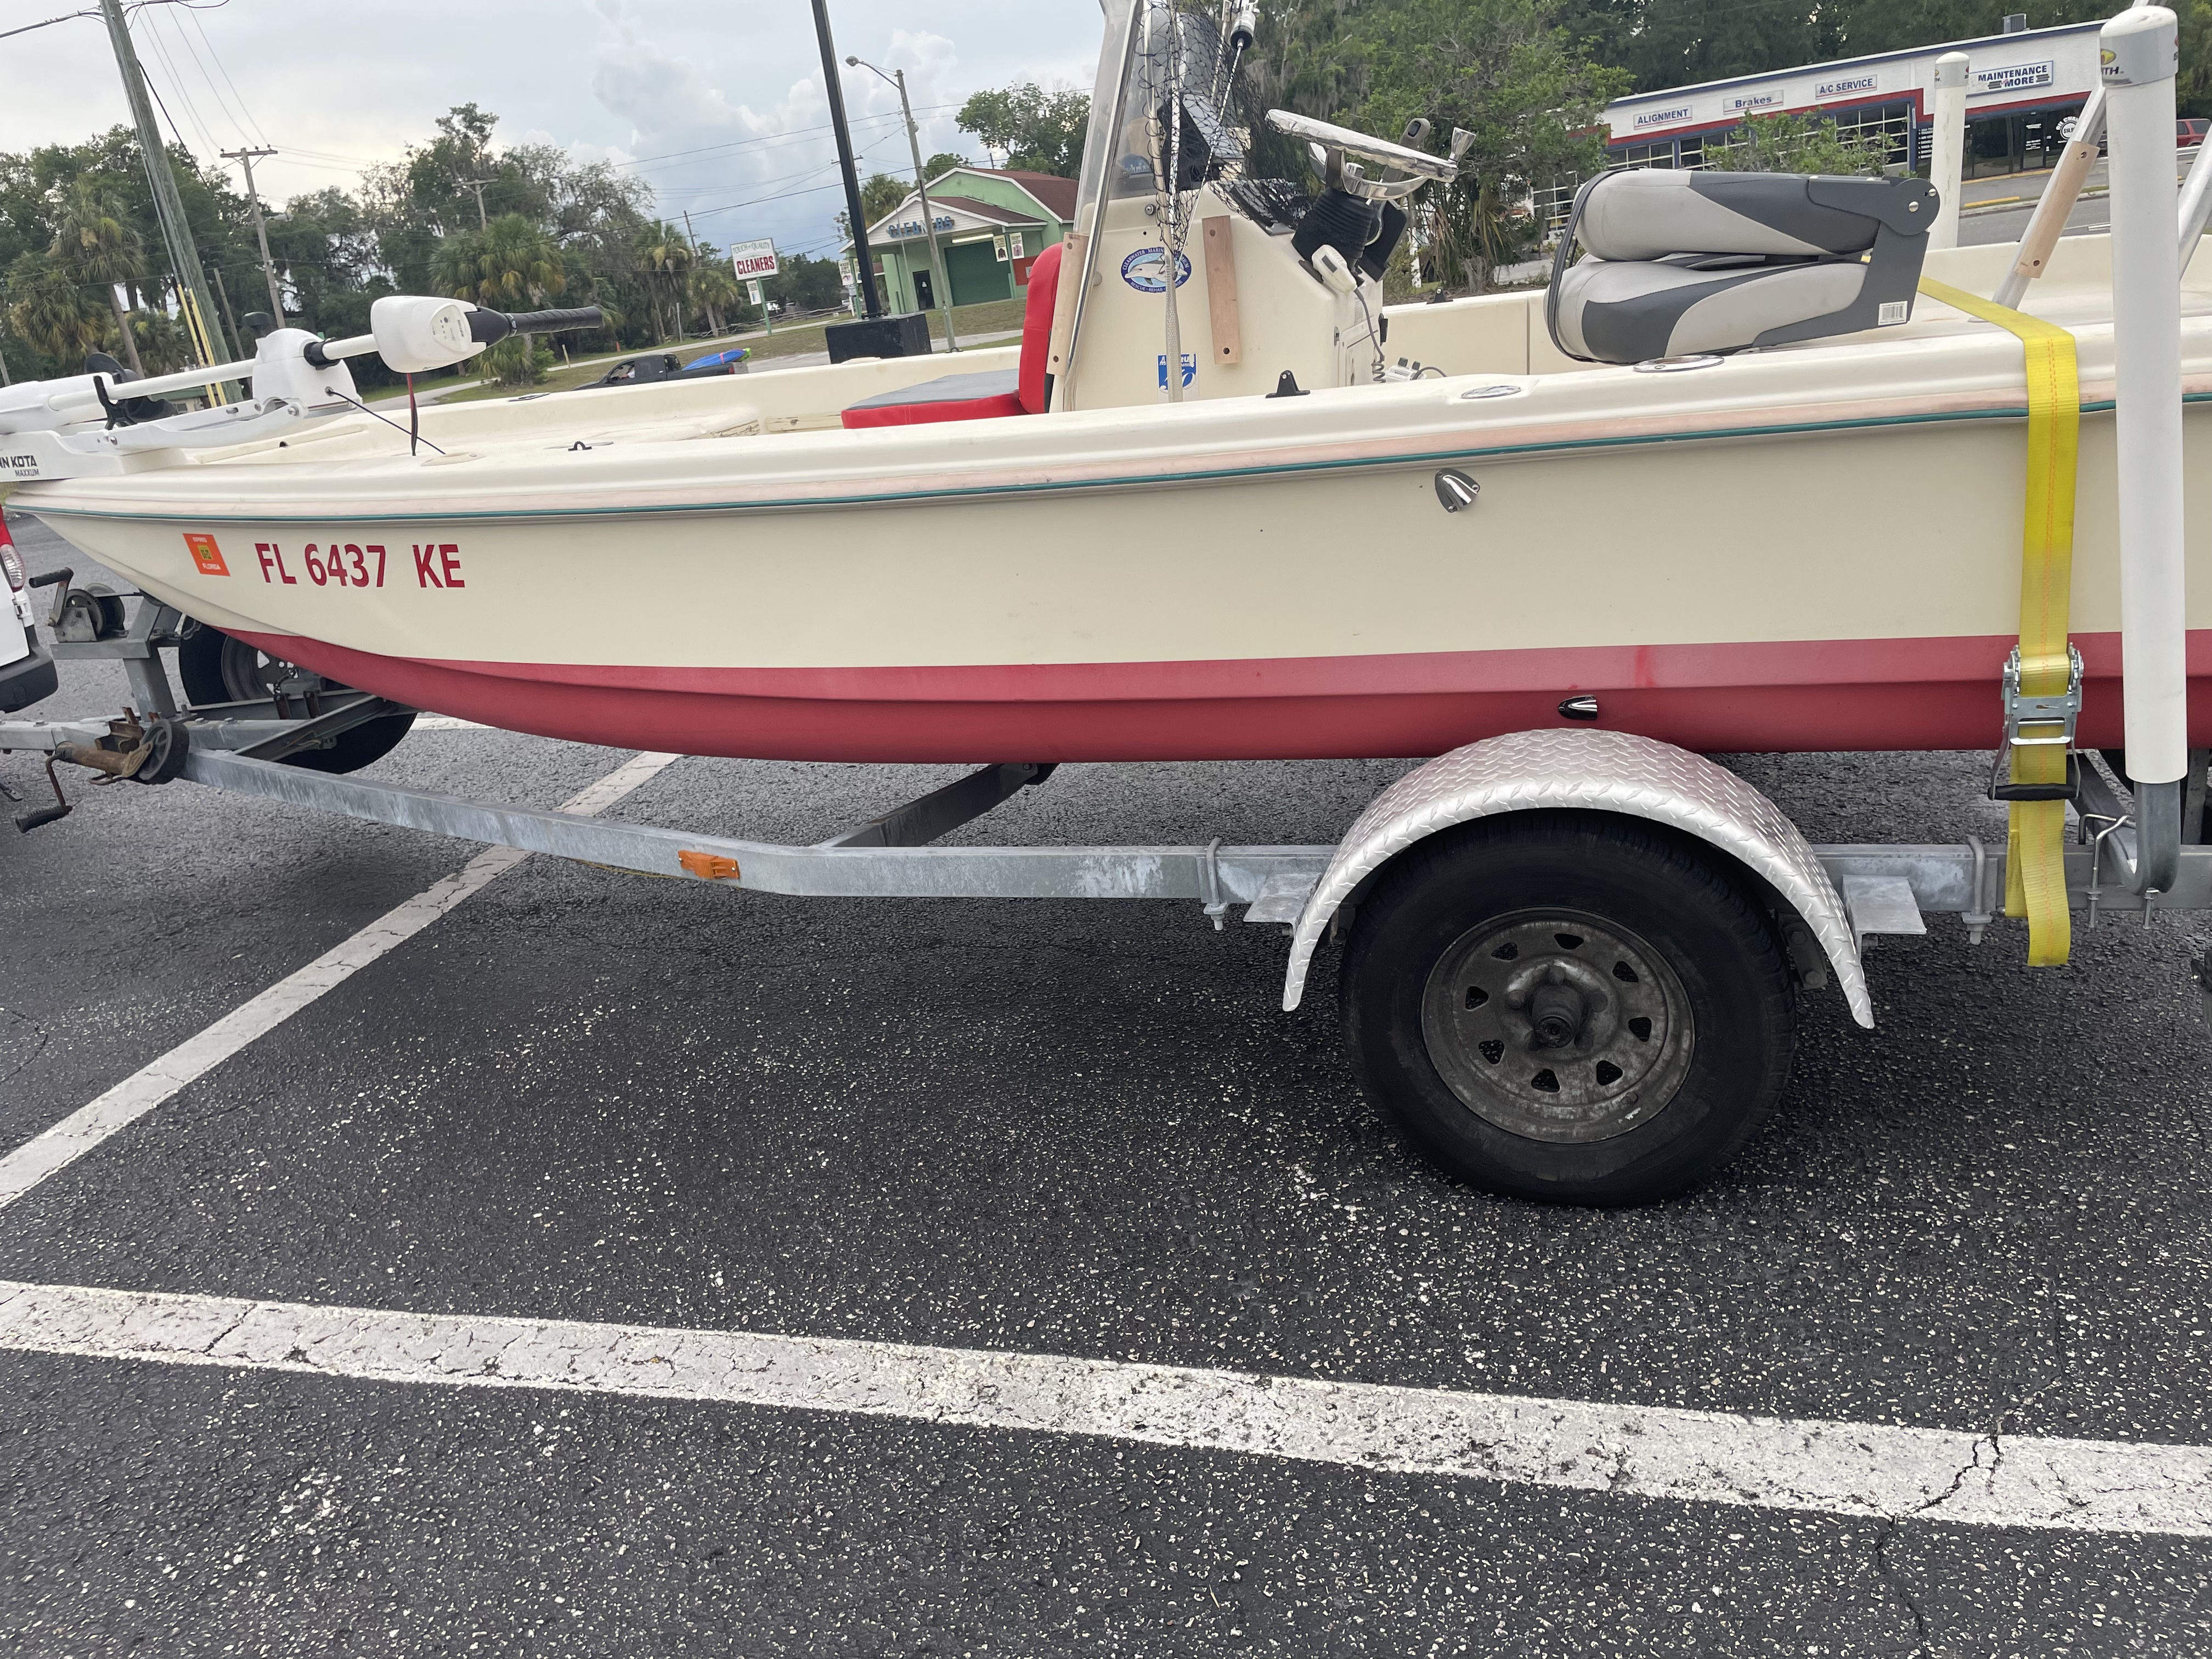 1999 Scout Scout  16.2sf C-90 P Power boat for sale in Homosassa, FL - image 26 